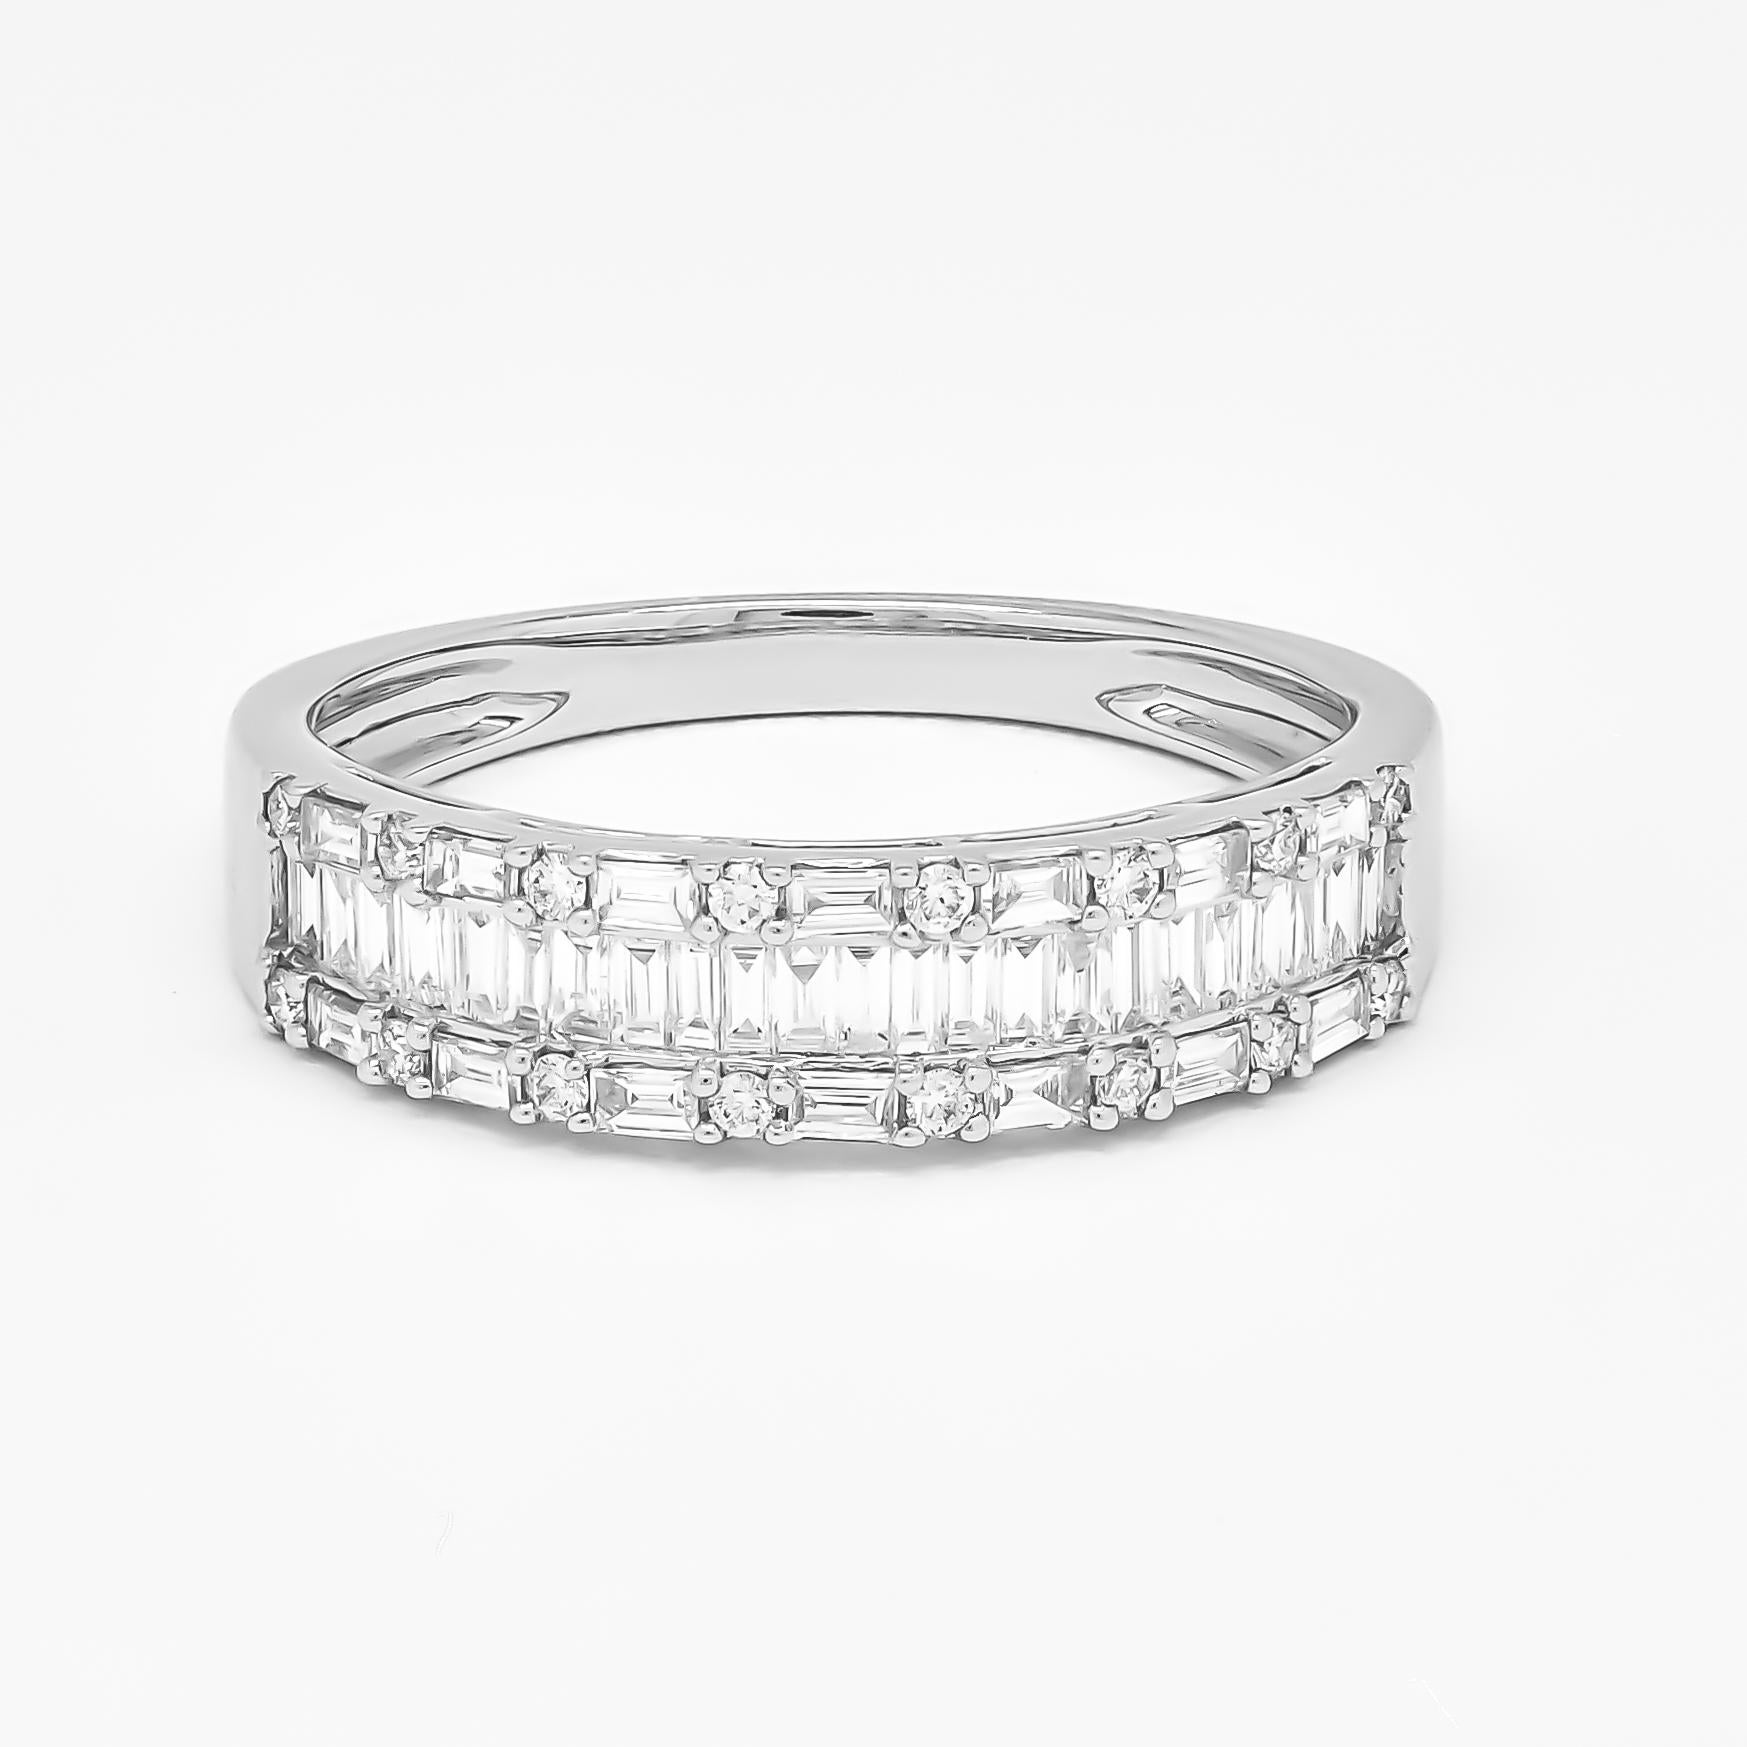 For Sale:  Exclusive Design 0.70 Carat Baguette Diamond Wedding Ring in White Gold 4